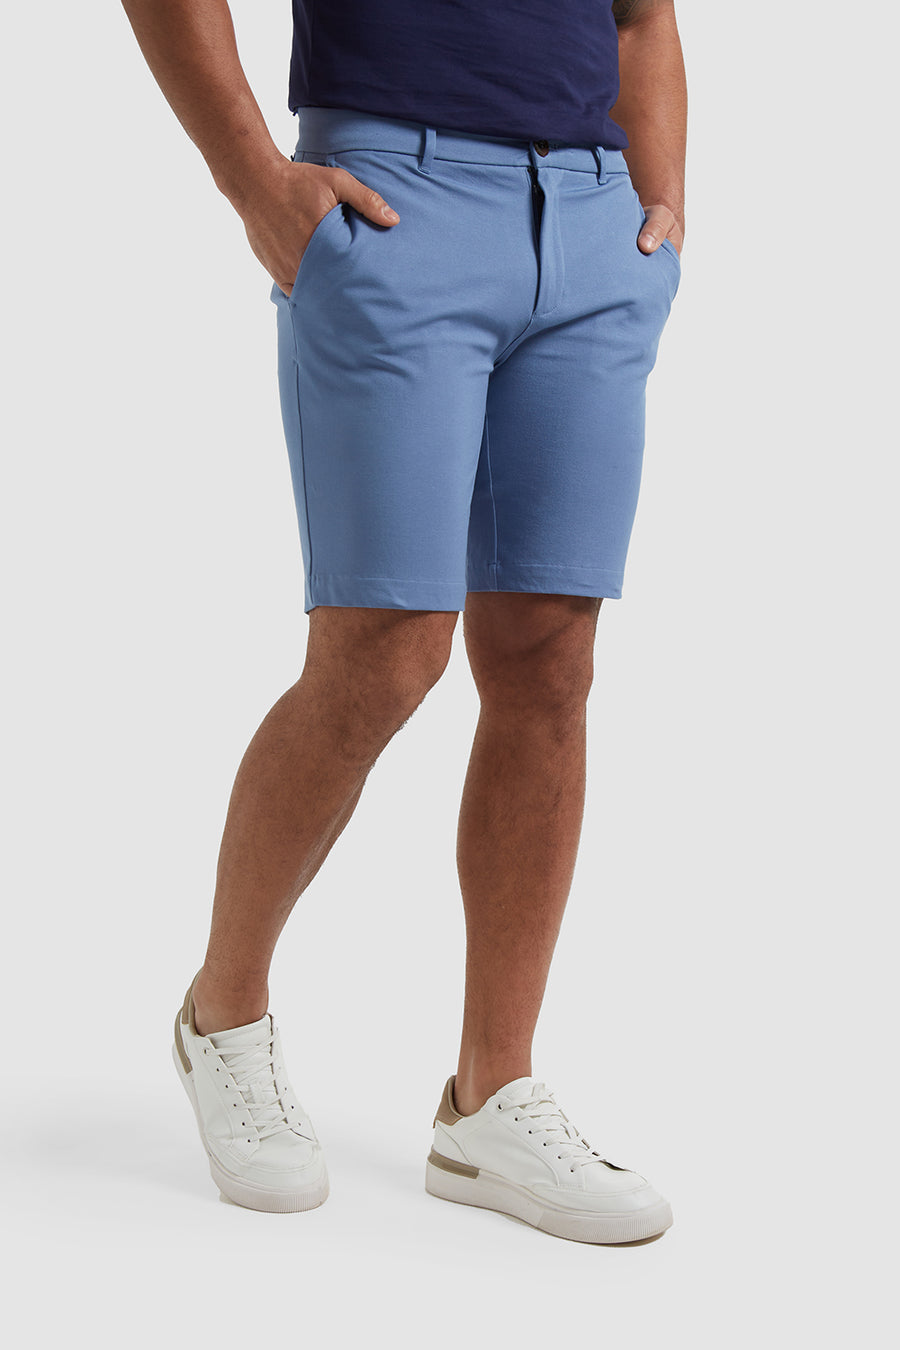 Athletic Fit Chino Shorts in Navy - TAILORED ATHLETE - USA